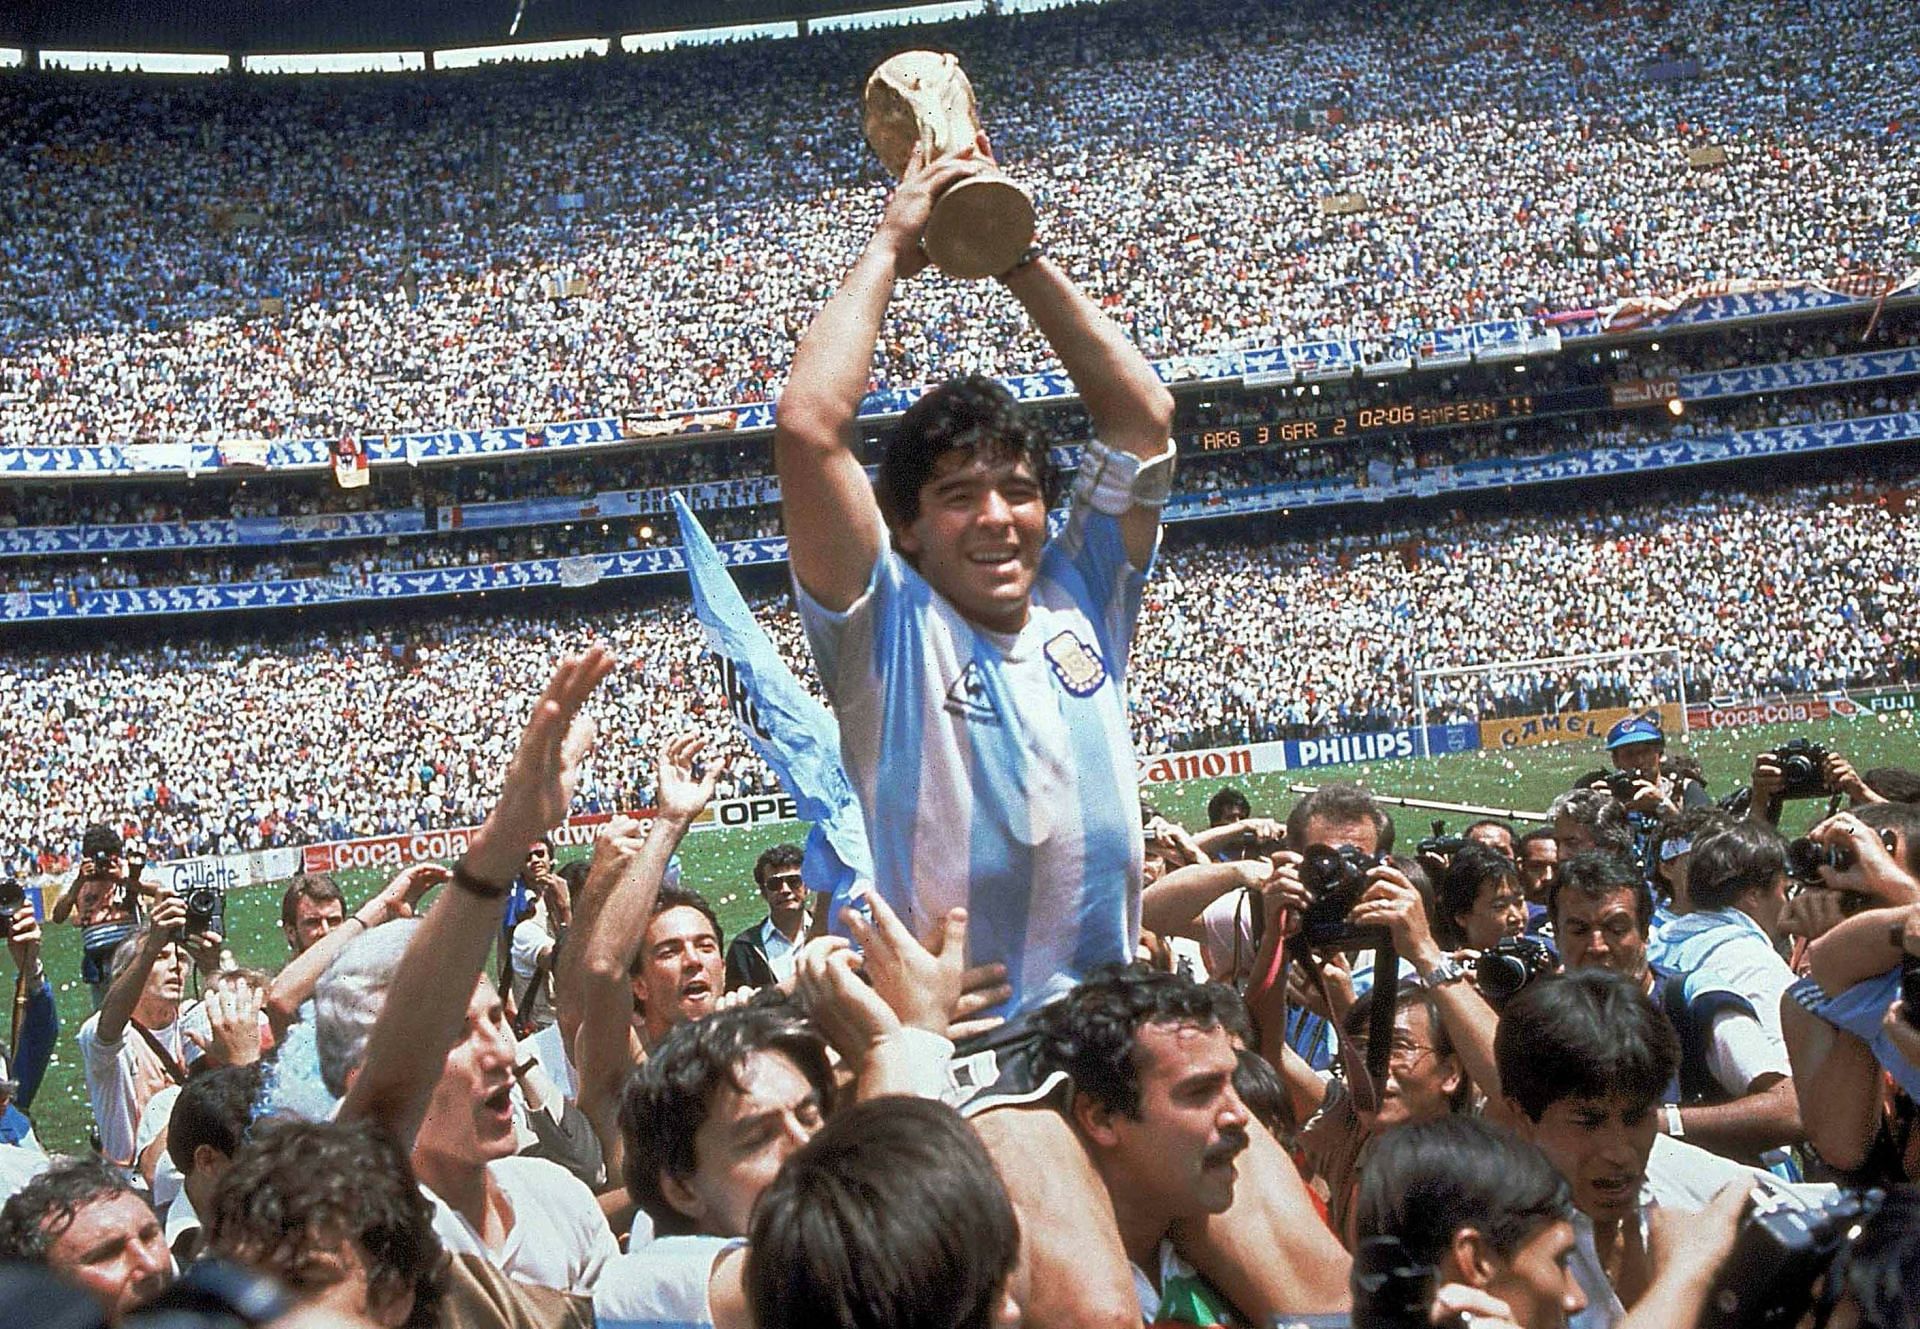 World Cup's top 100 footballers: how to choose between Pelé and Maradona?, World Cup